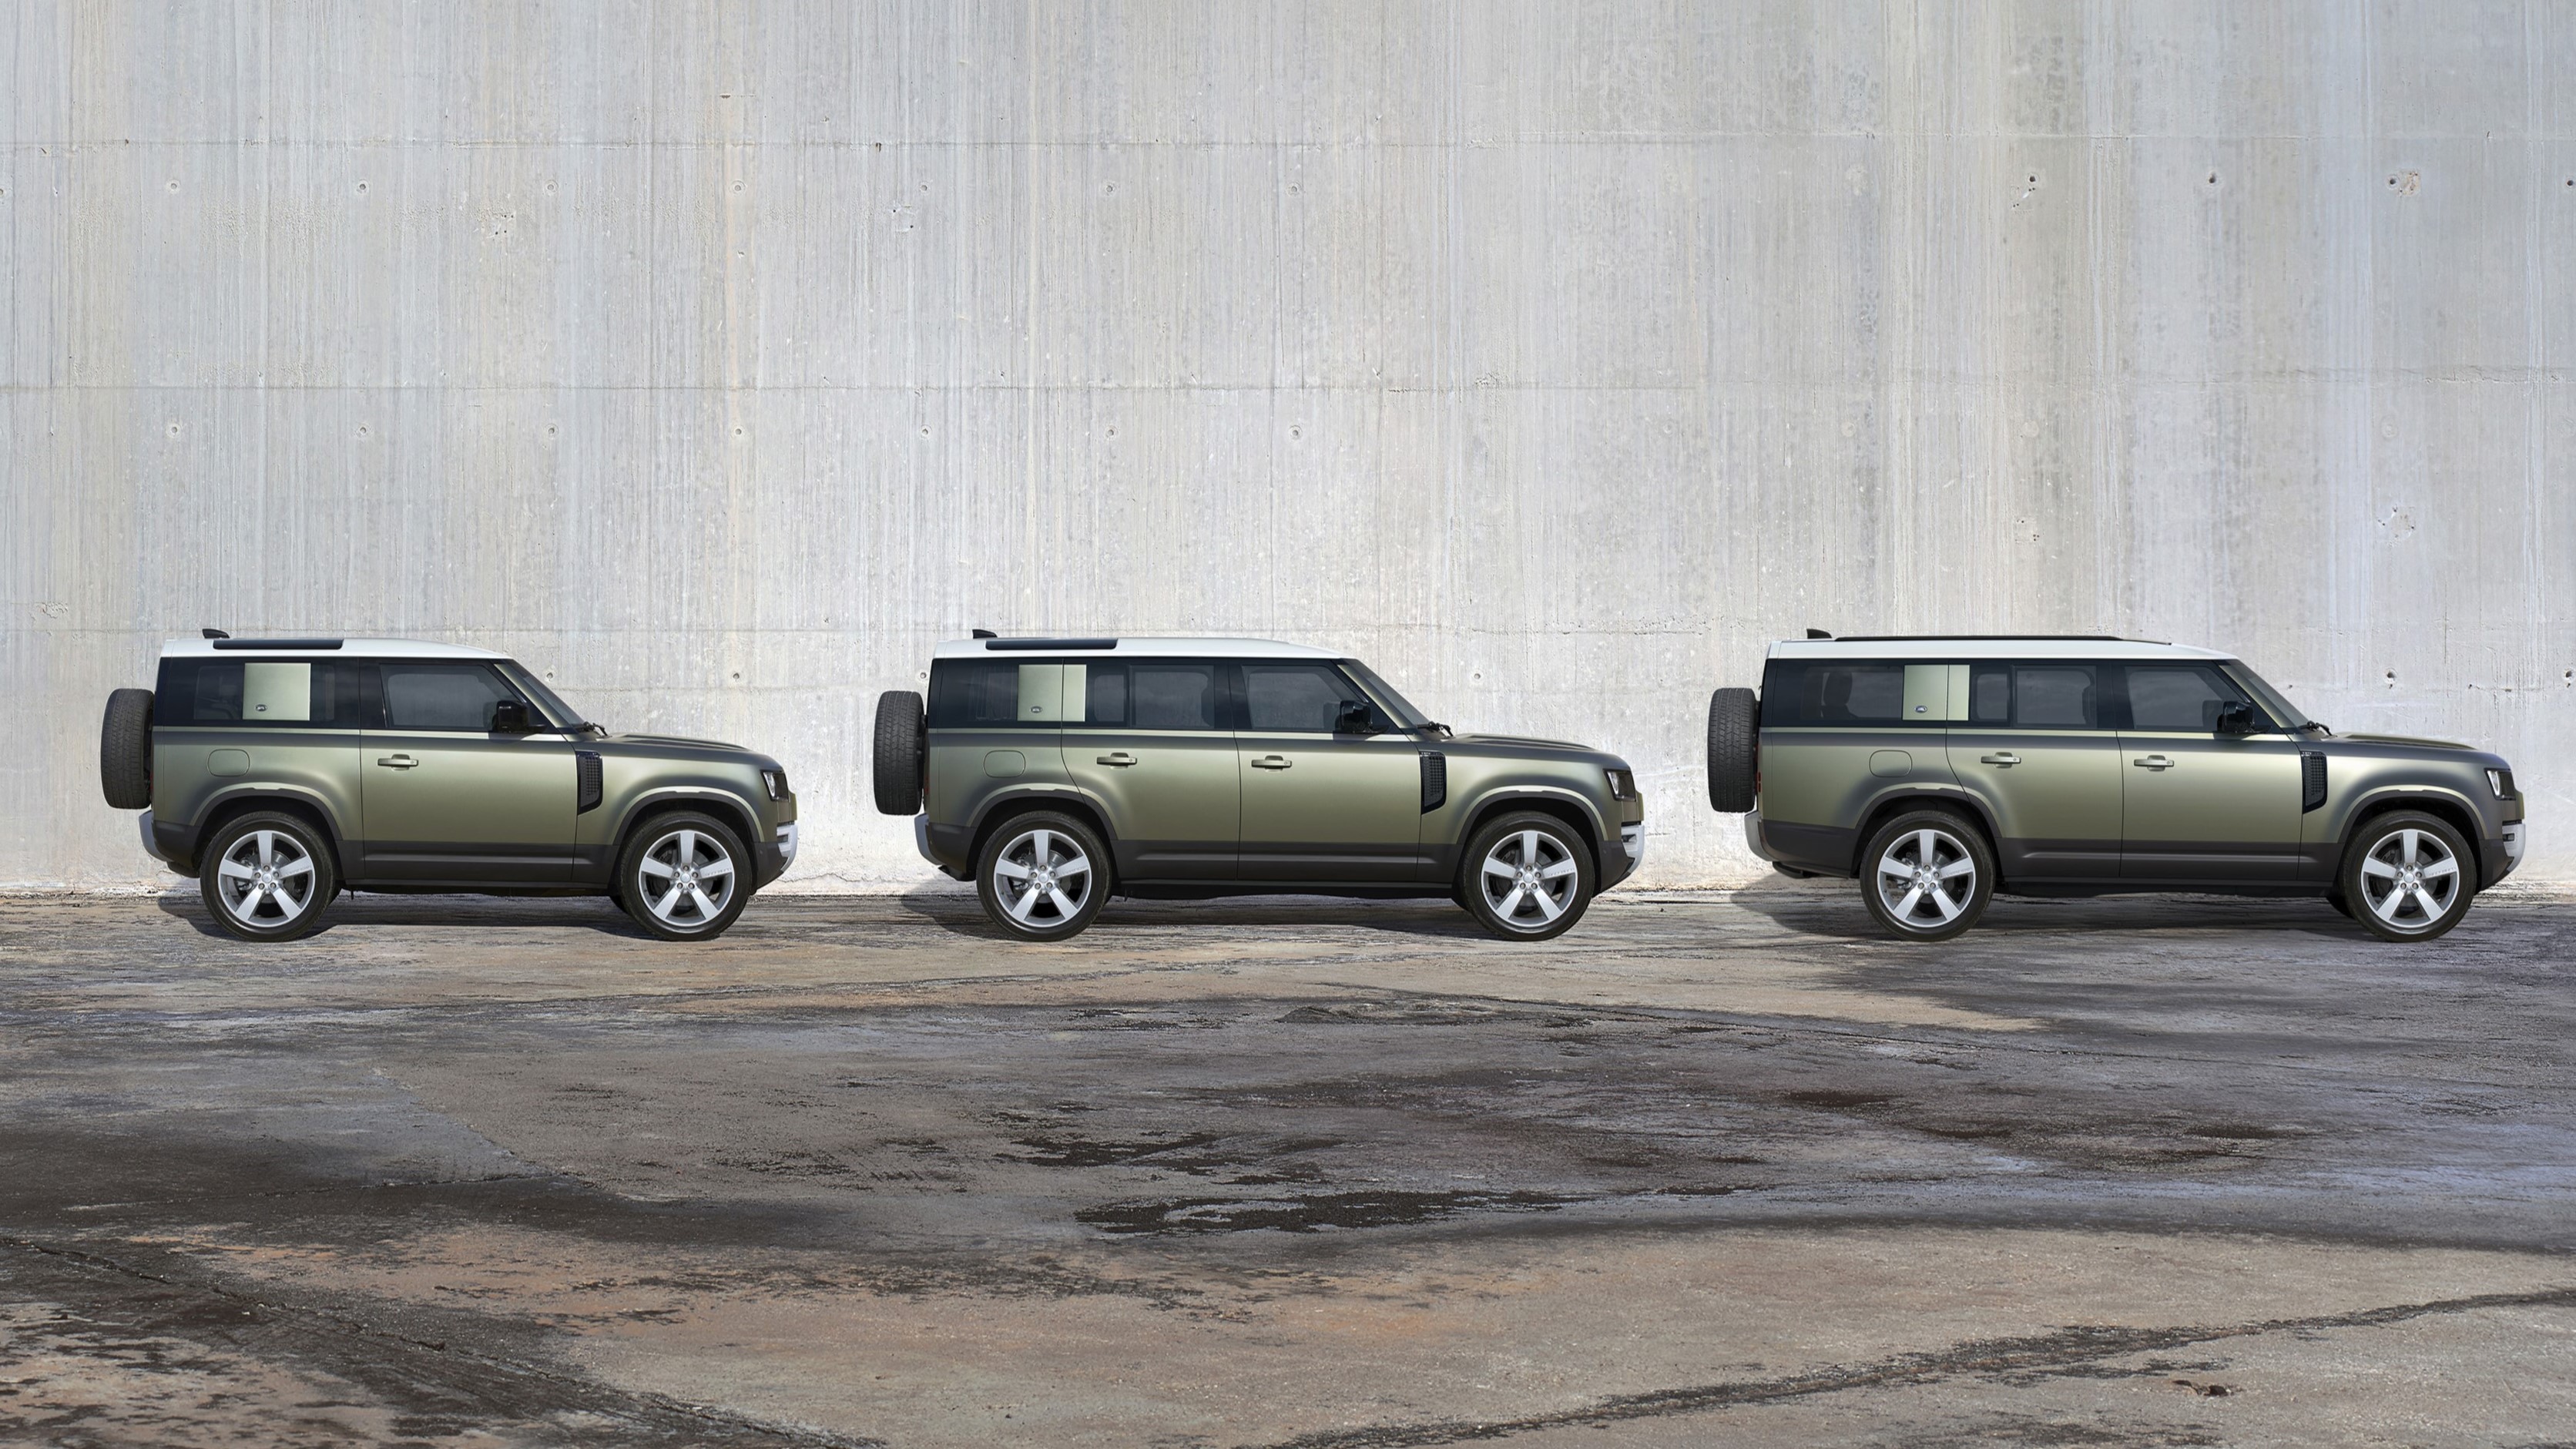 Land Rover Defender lineup expands to three vehicles with 8-seat, defender  